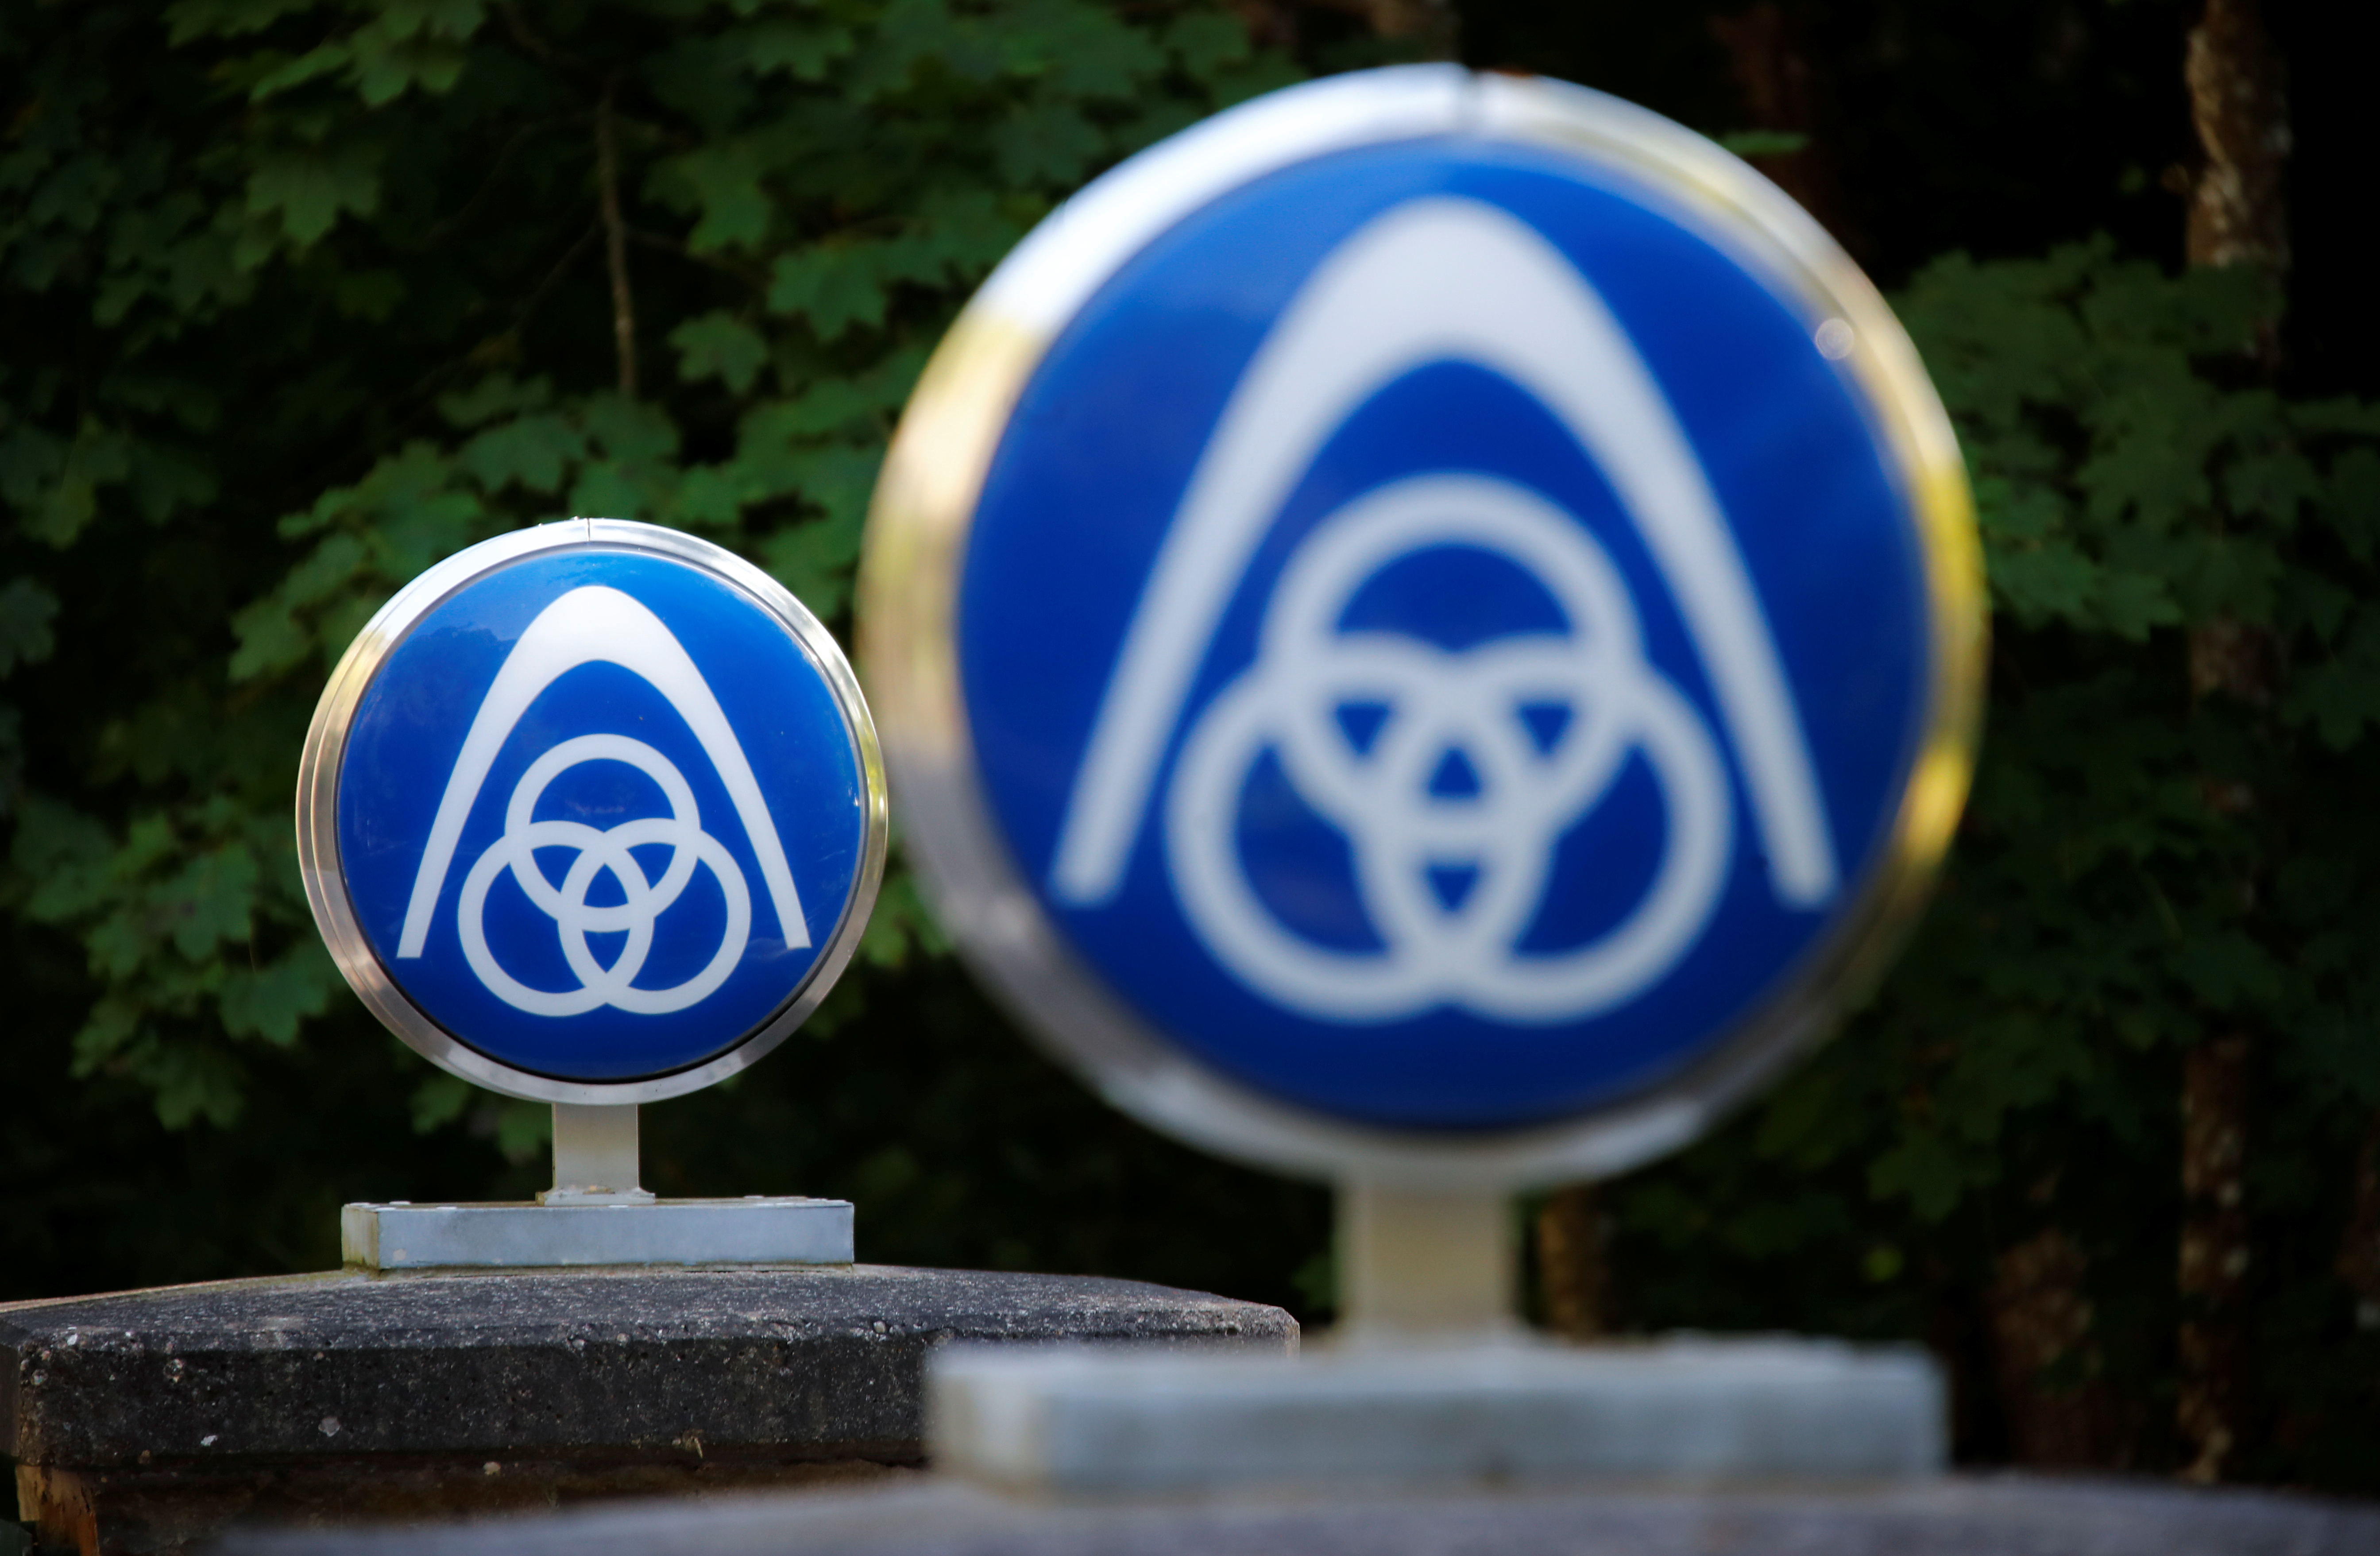 The Thyssenkrupp logo is seen near Lorch, Germany, September 15, 2019. REUTERS/Wolfgang Rattay